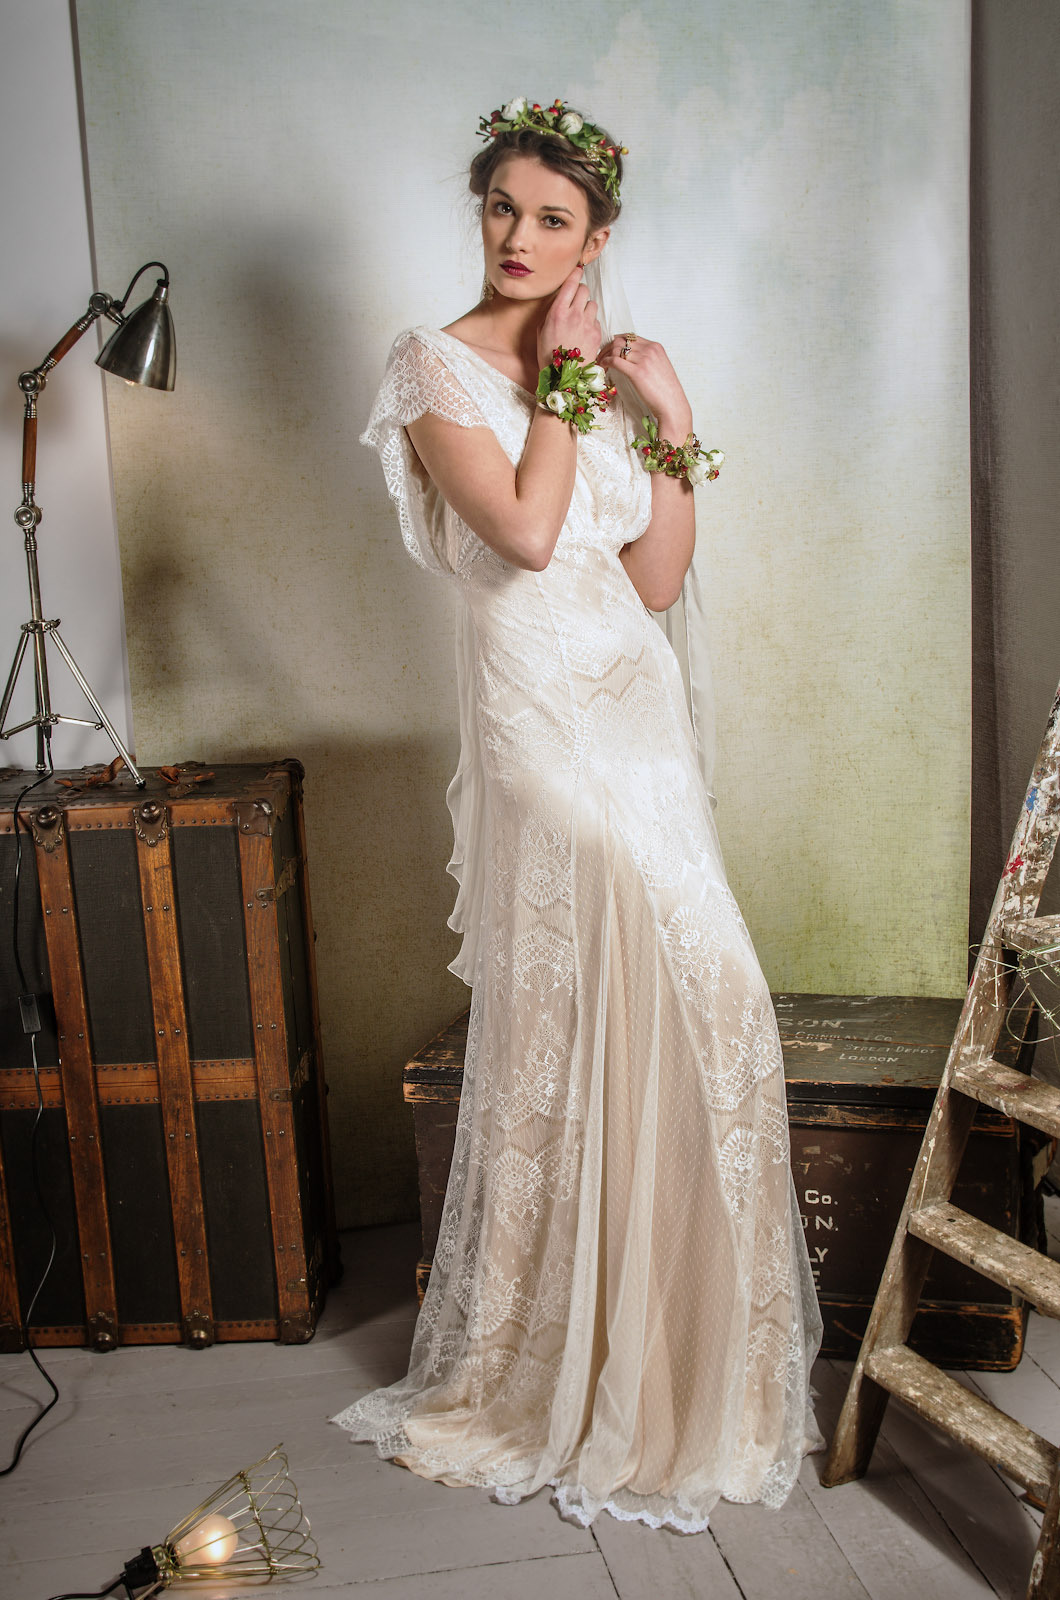 Belle & Bunty's 2014 Bridal Capsule Collection - Ophelia